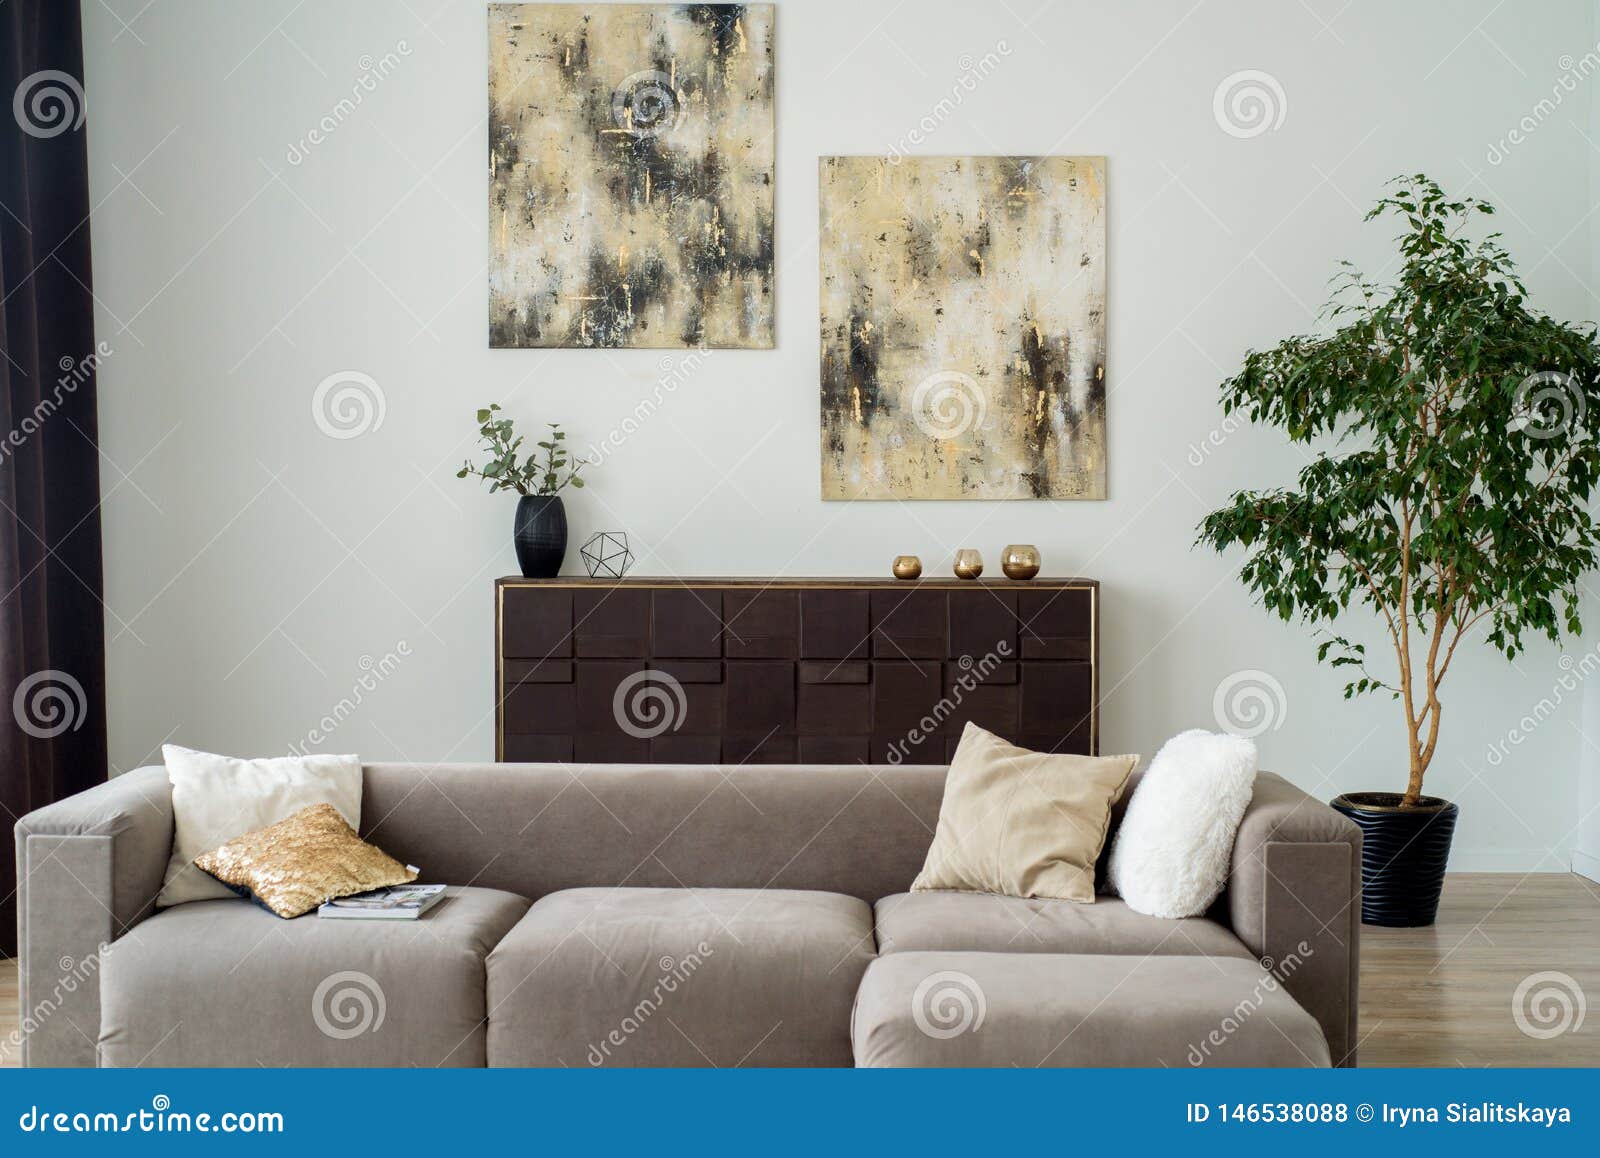 Modern Living Room With Grey Sofa With Decorative Pillows